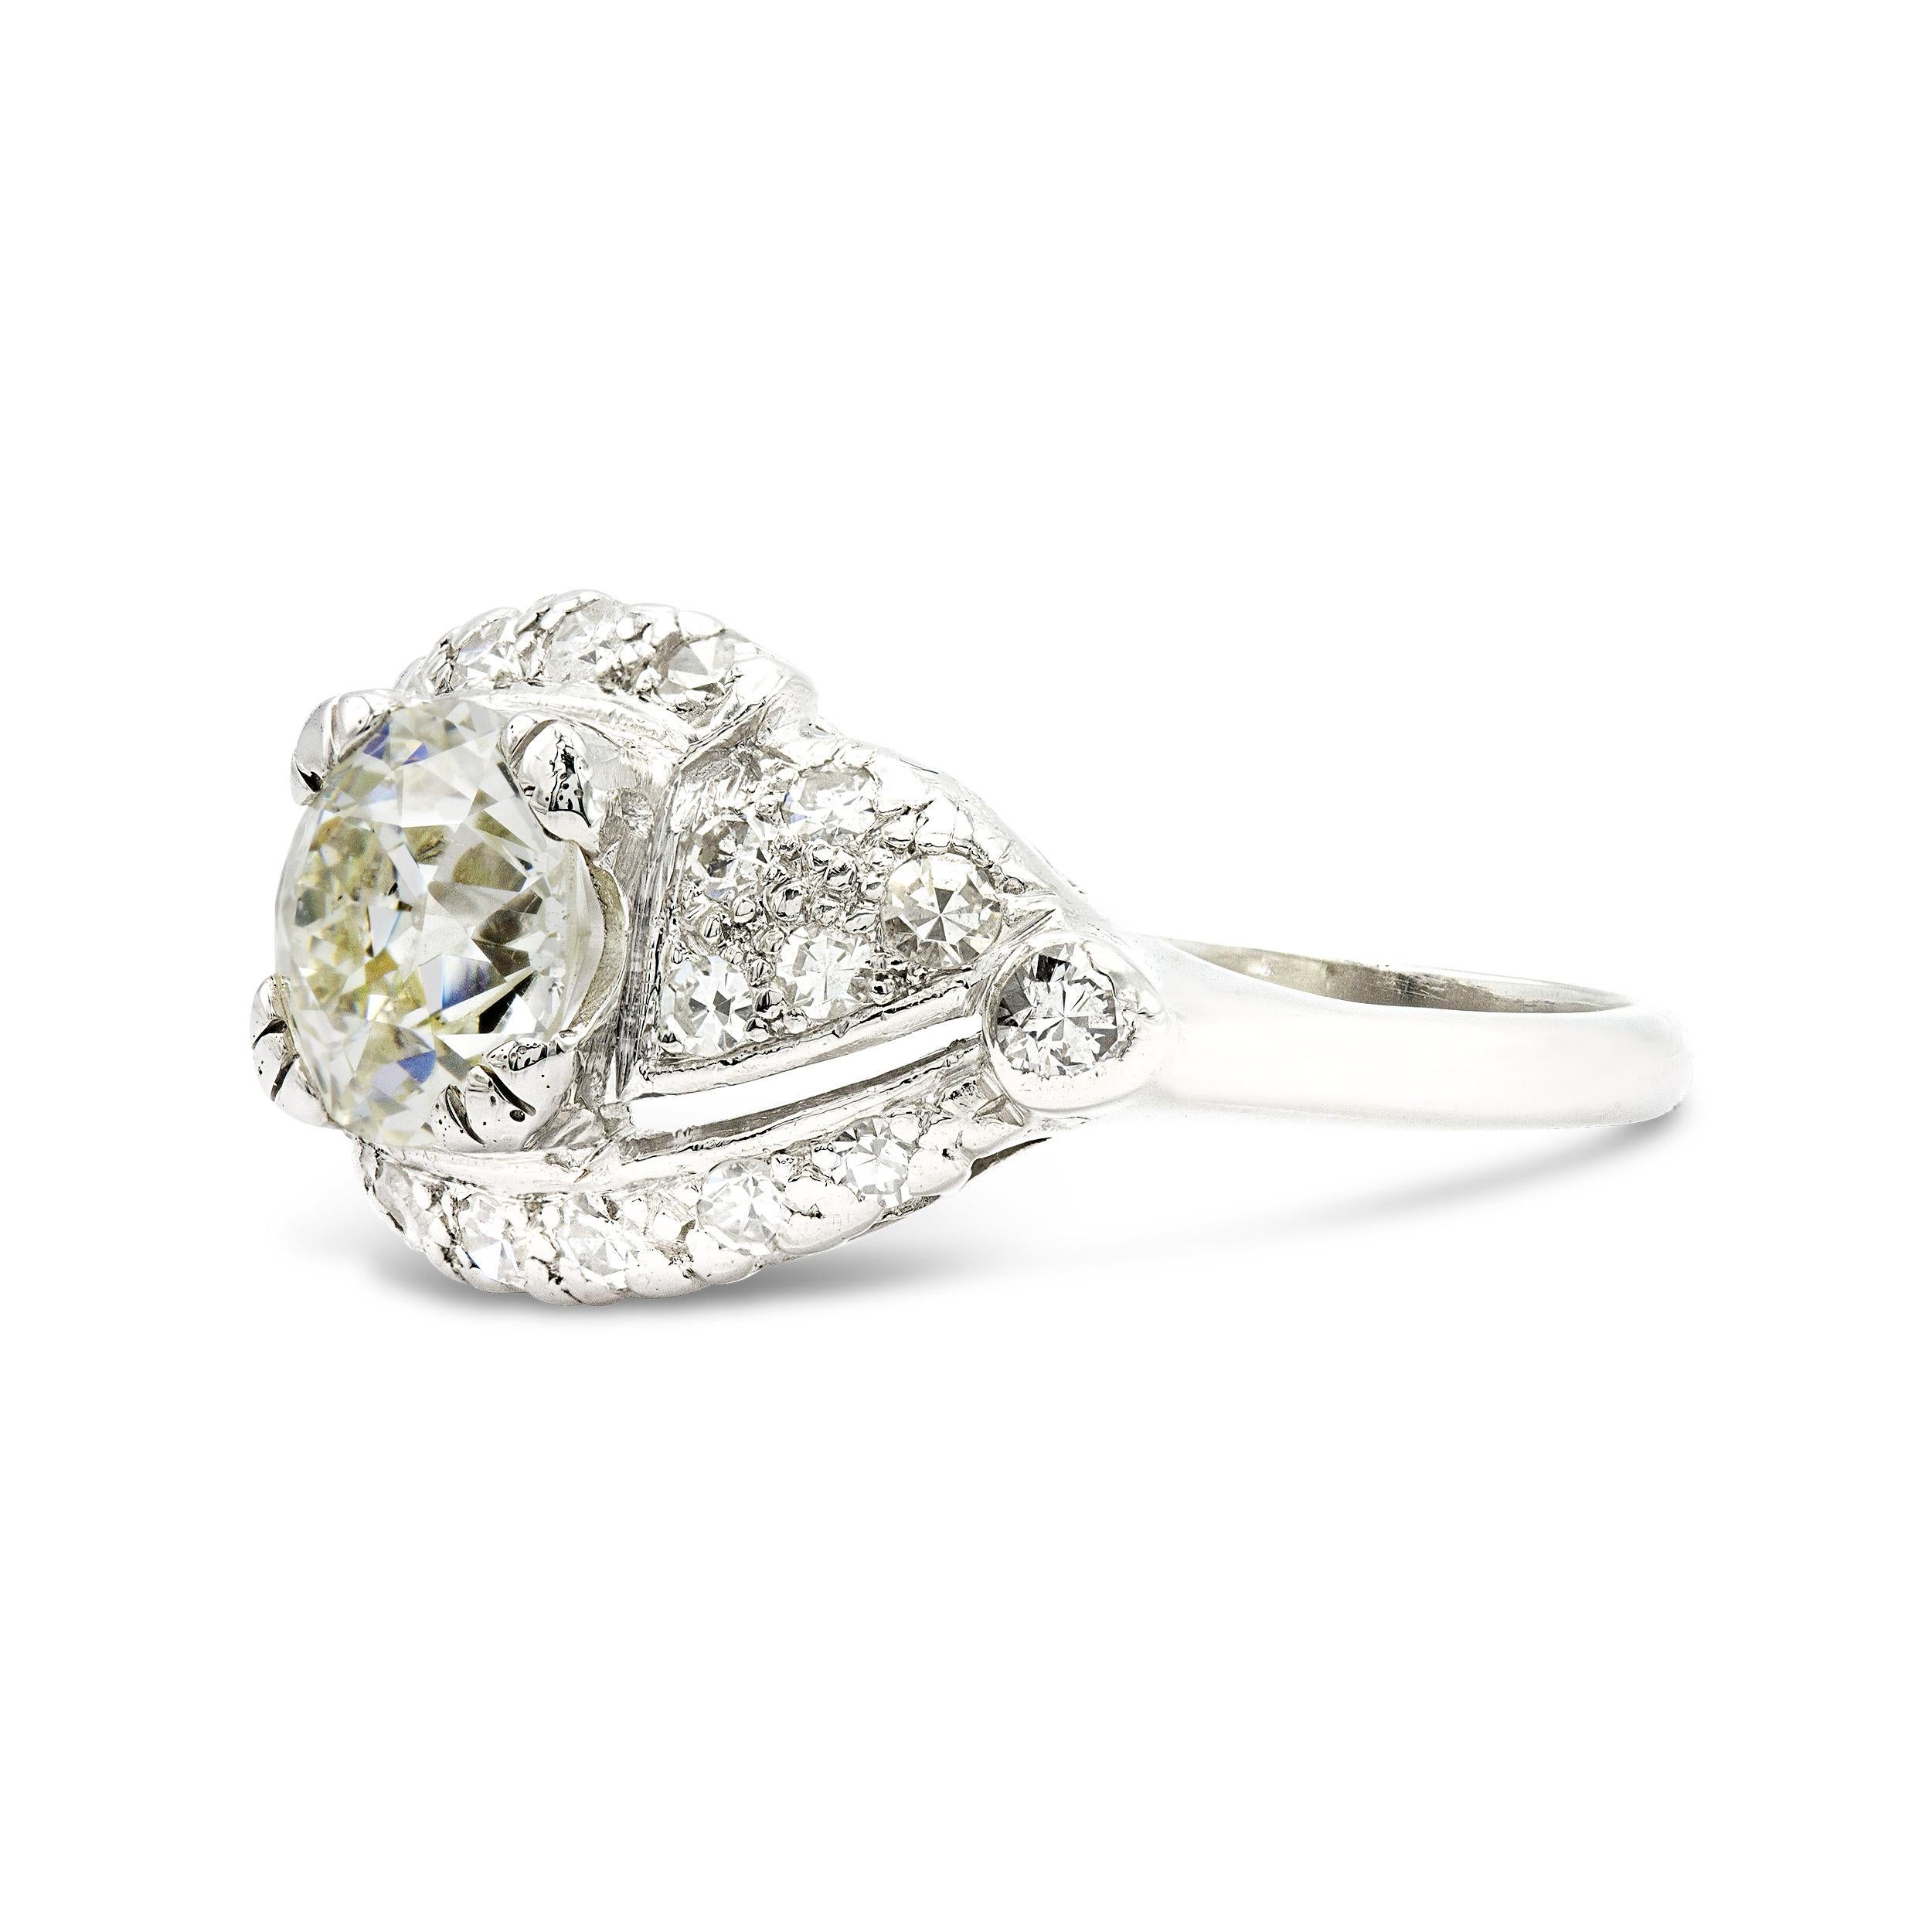 Here's a unique ring that would be hard to miss. A sea of bead set diamonds shimmer from this ring, with a 1.45 ct. old European diamond at its center. This ring offers some serious finger coverage and is the perfect choice for a woman looking for